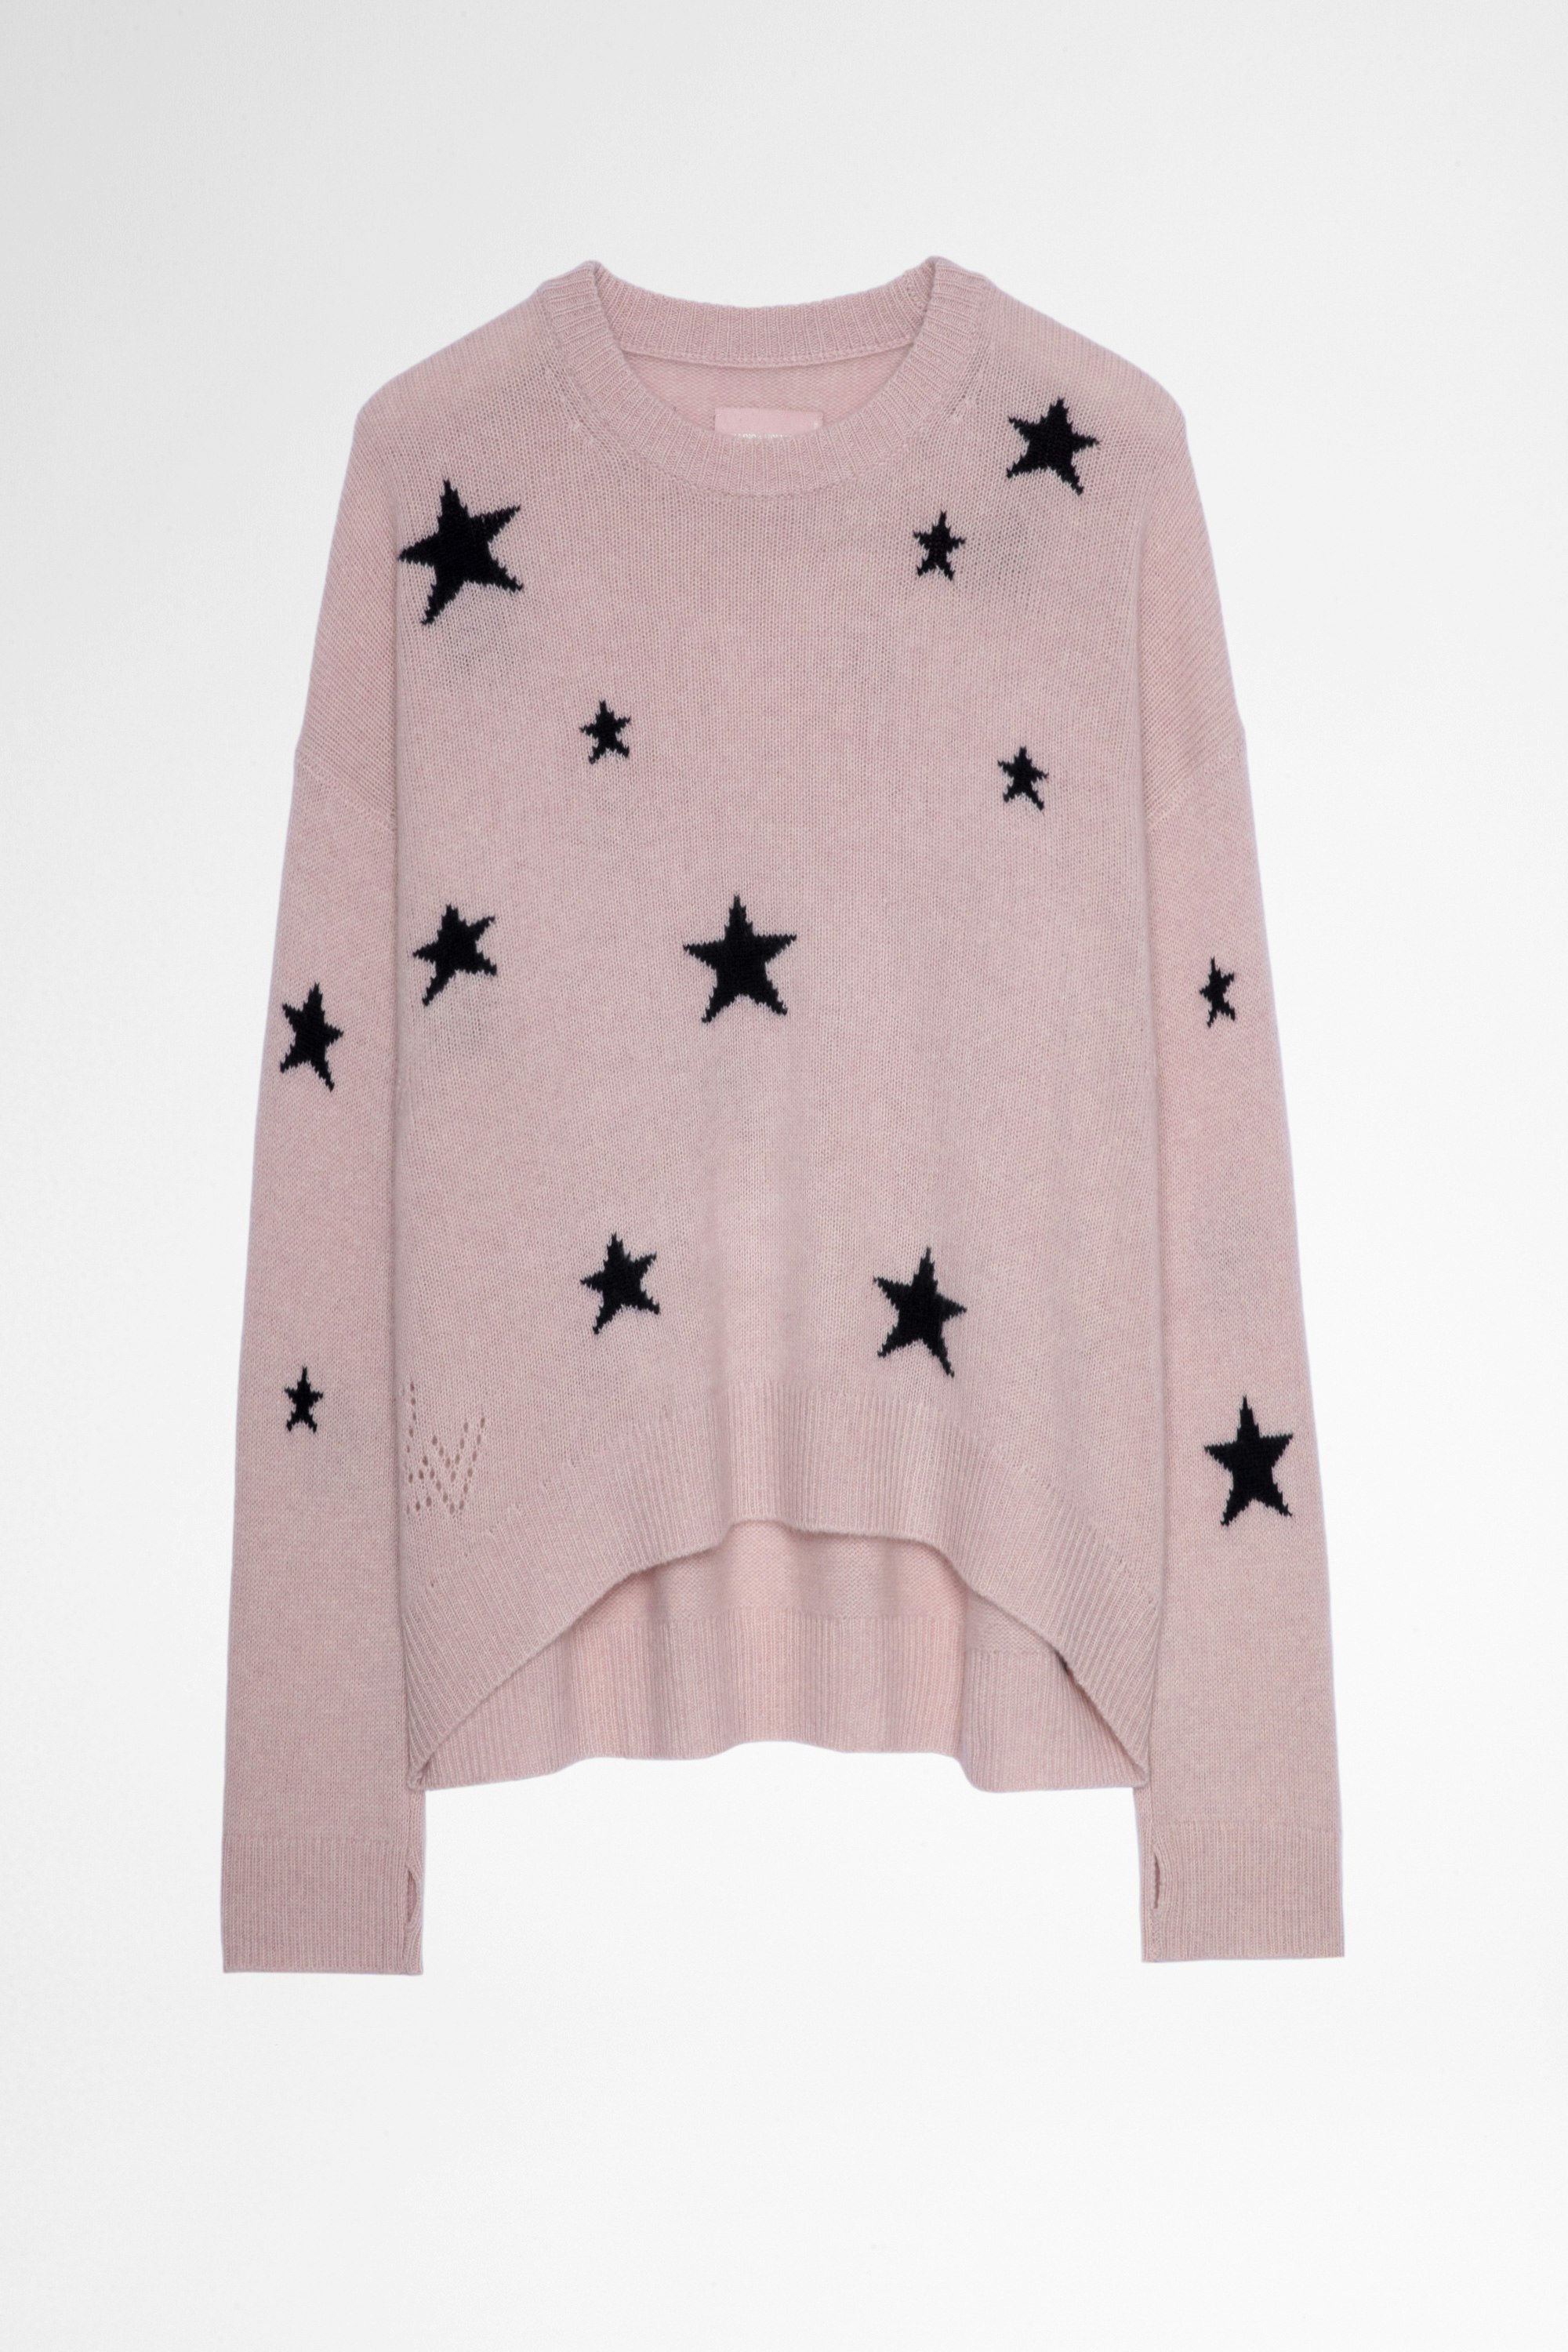 Markus Stars Sweater Cashmere Women's pink cashmere sweater with star pattern